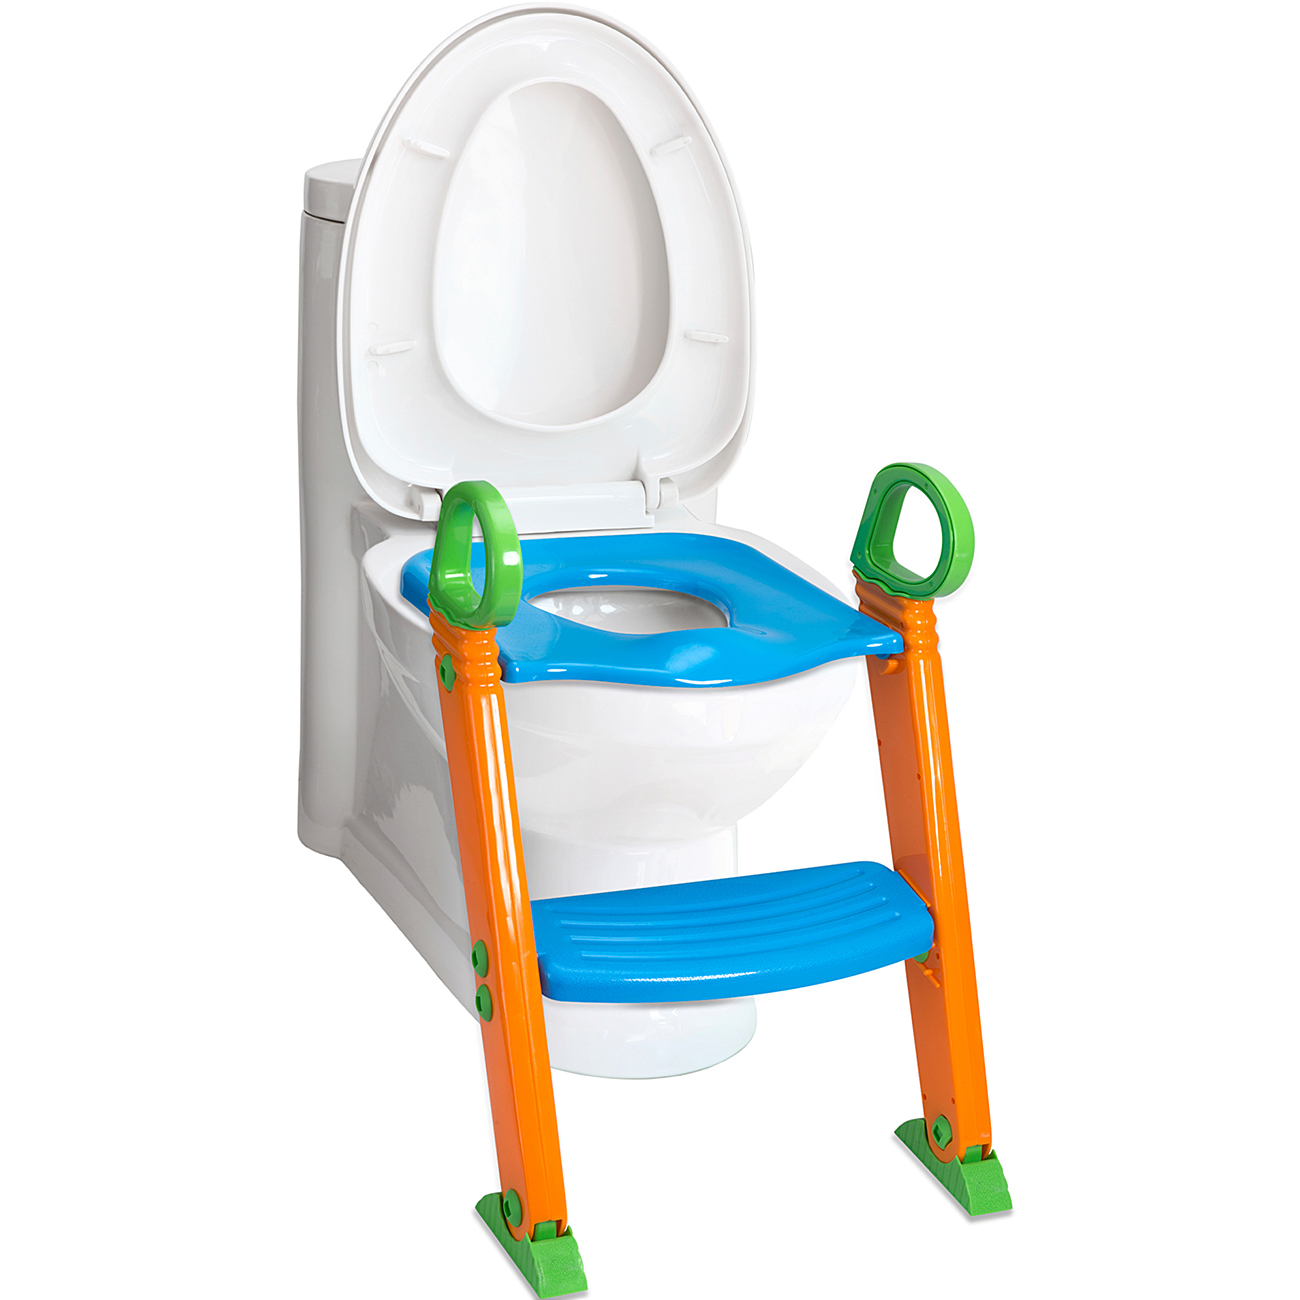 Kazoo Kids Foldable Potty Training Seat with Ladder for Toddlers Unisex - image 4 of 7